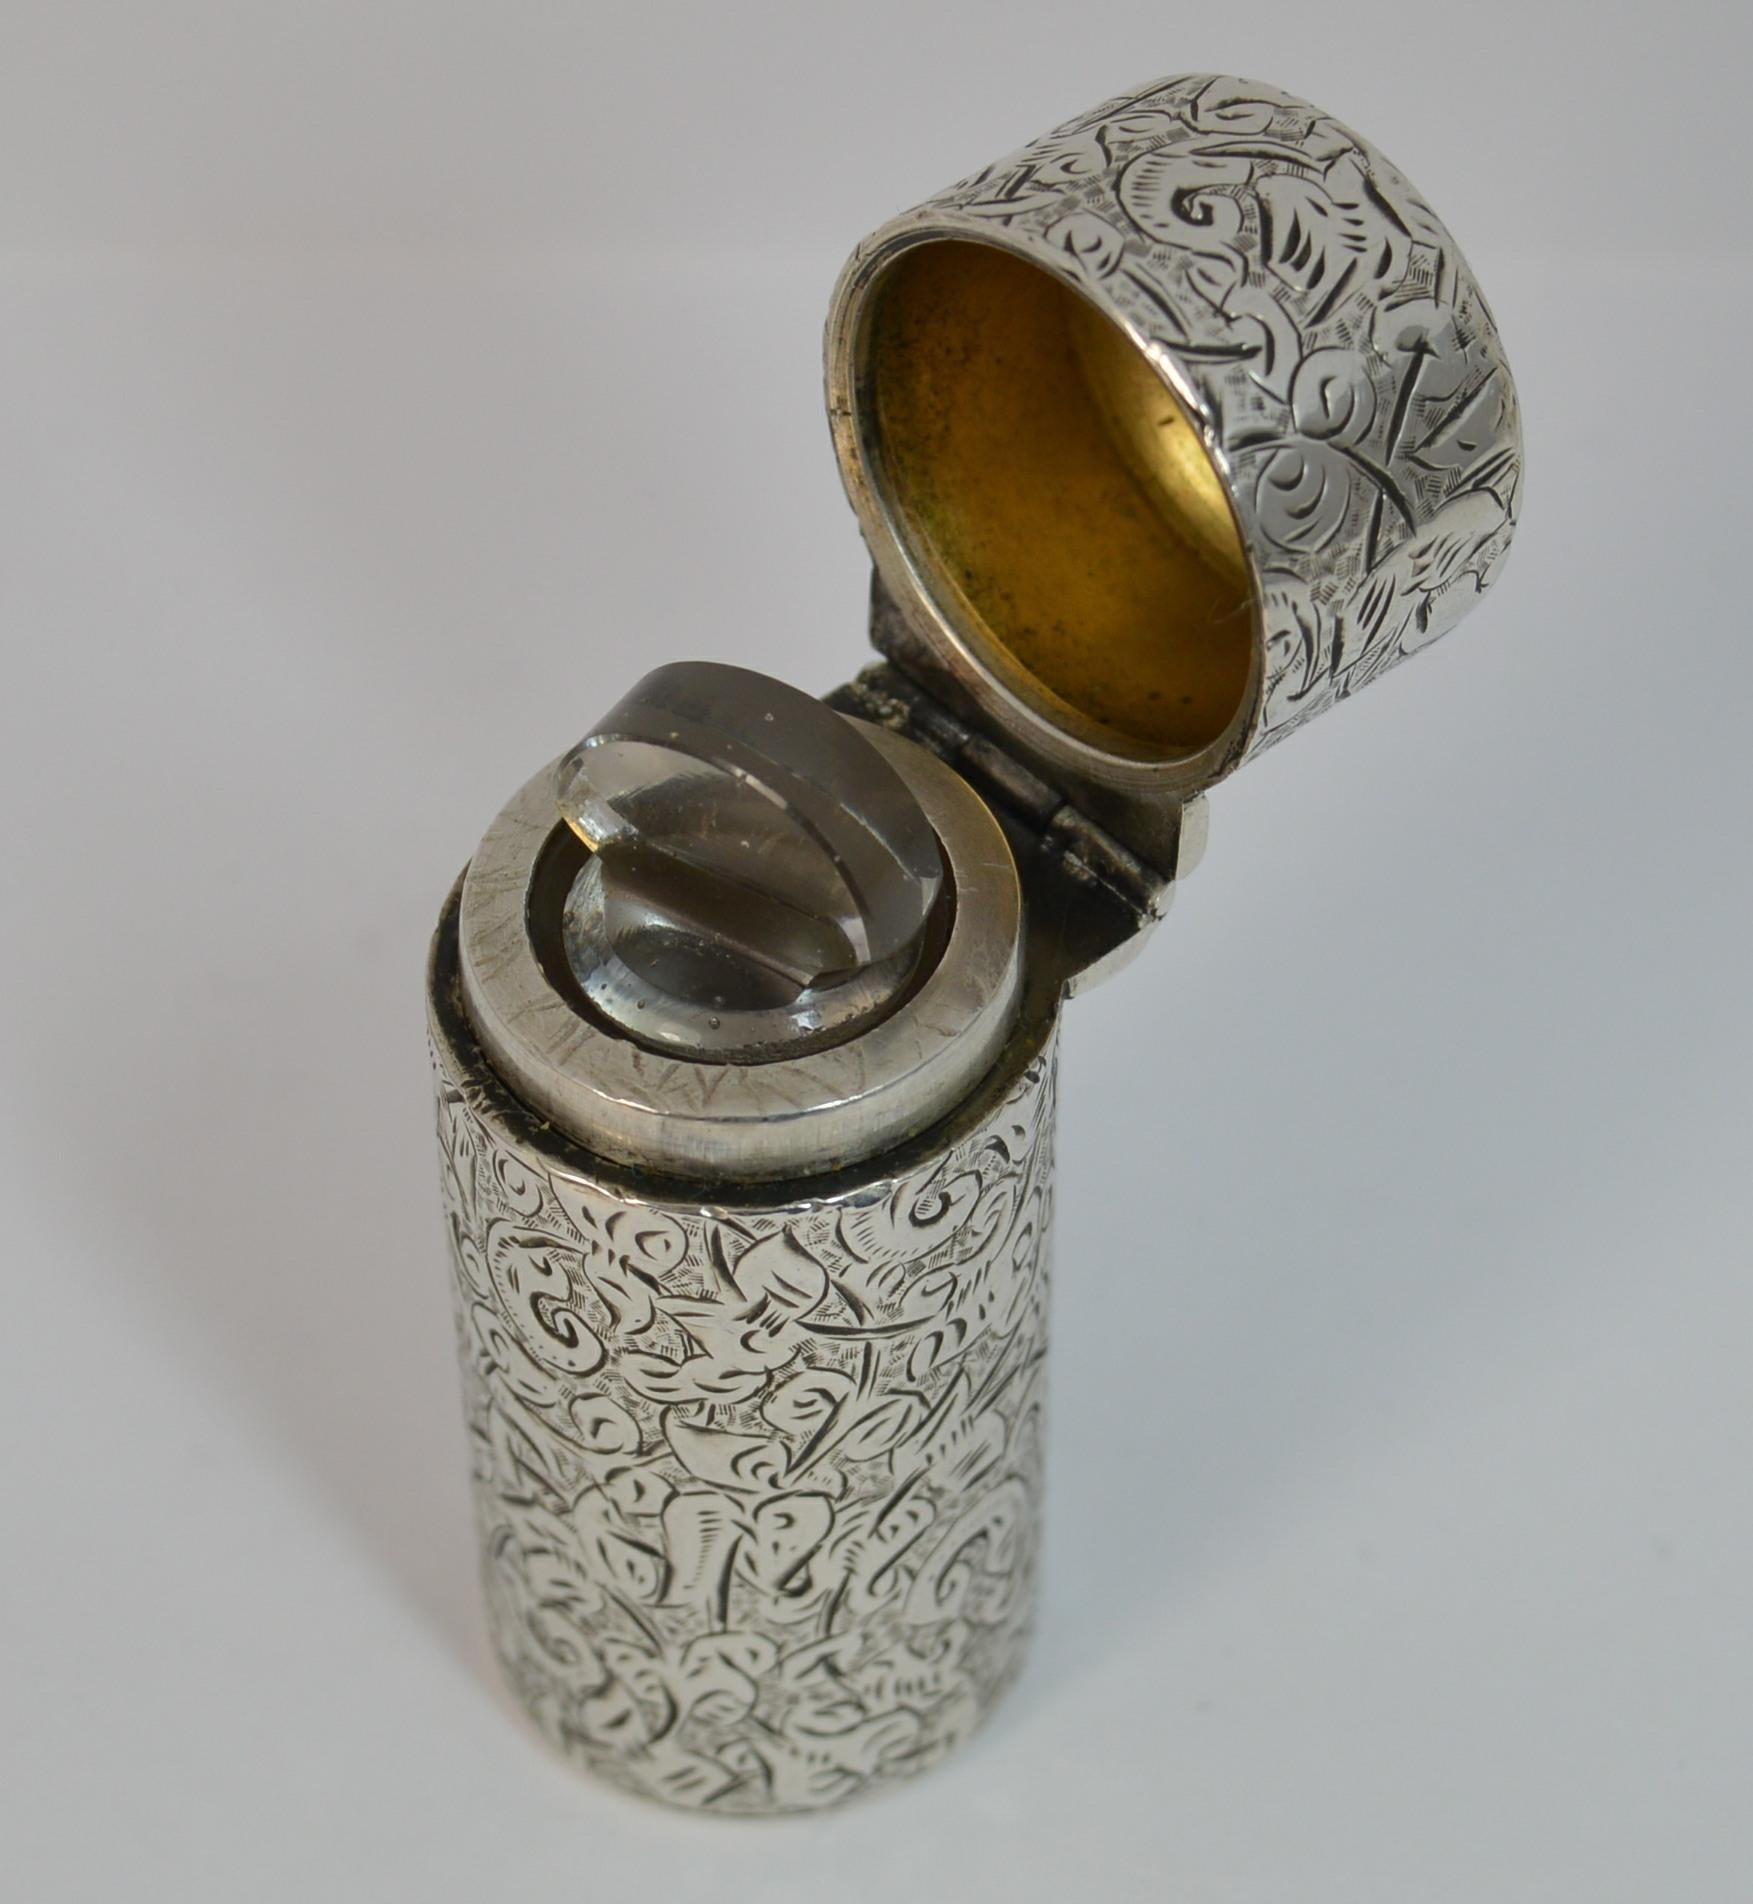 Rare Sampson Mordan & Co. Solid Silver Scent Bottle and Stopper 2